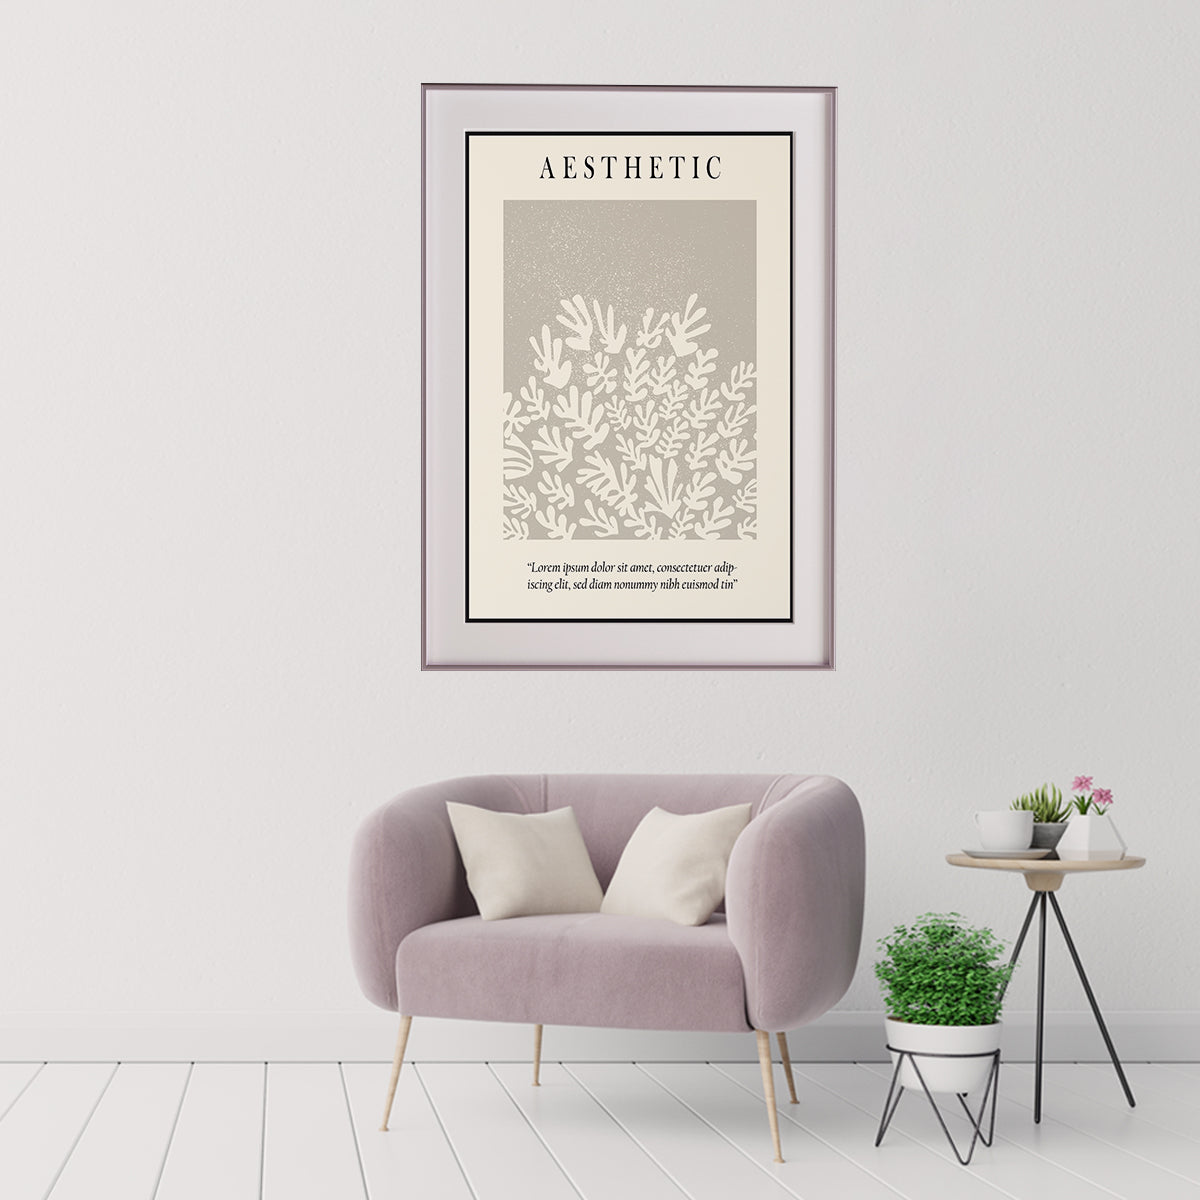 Minimalistic Aesthetic Vintage Poster Wall Art-Vertical Posters NOT FRAMED-CetArt-8″x10″ inches-CetArt